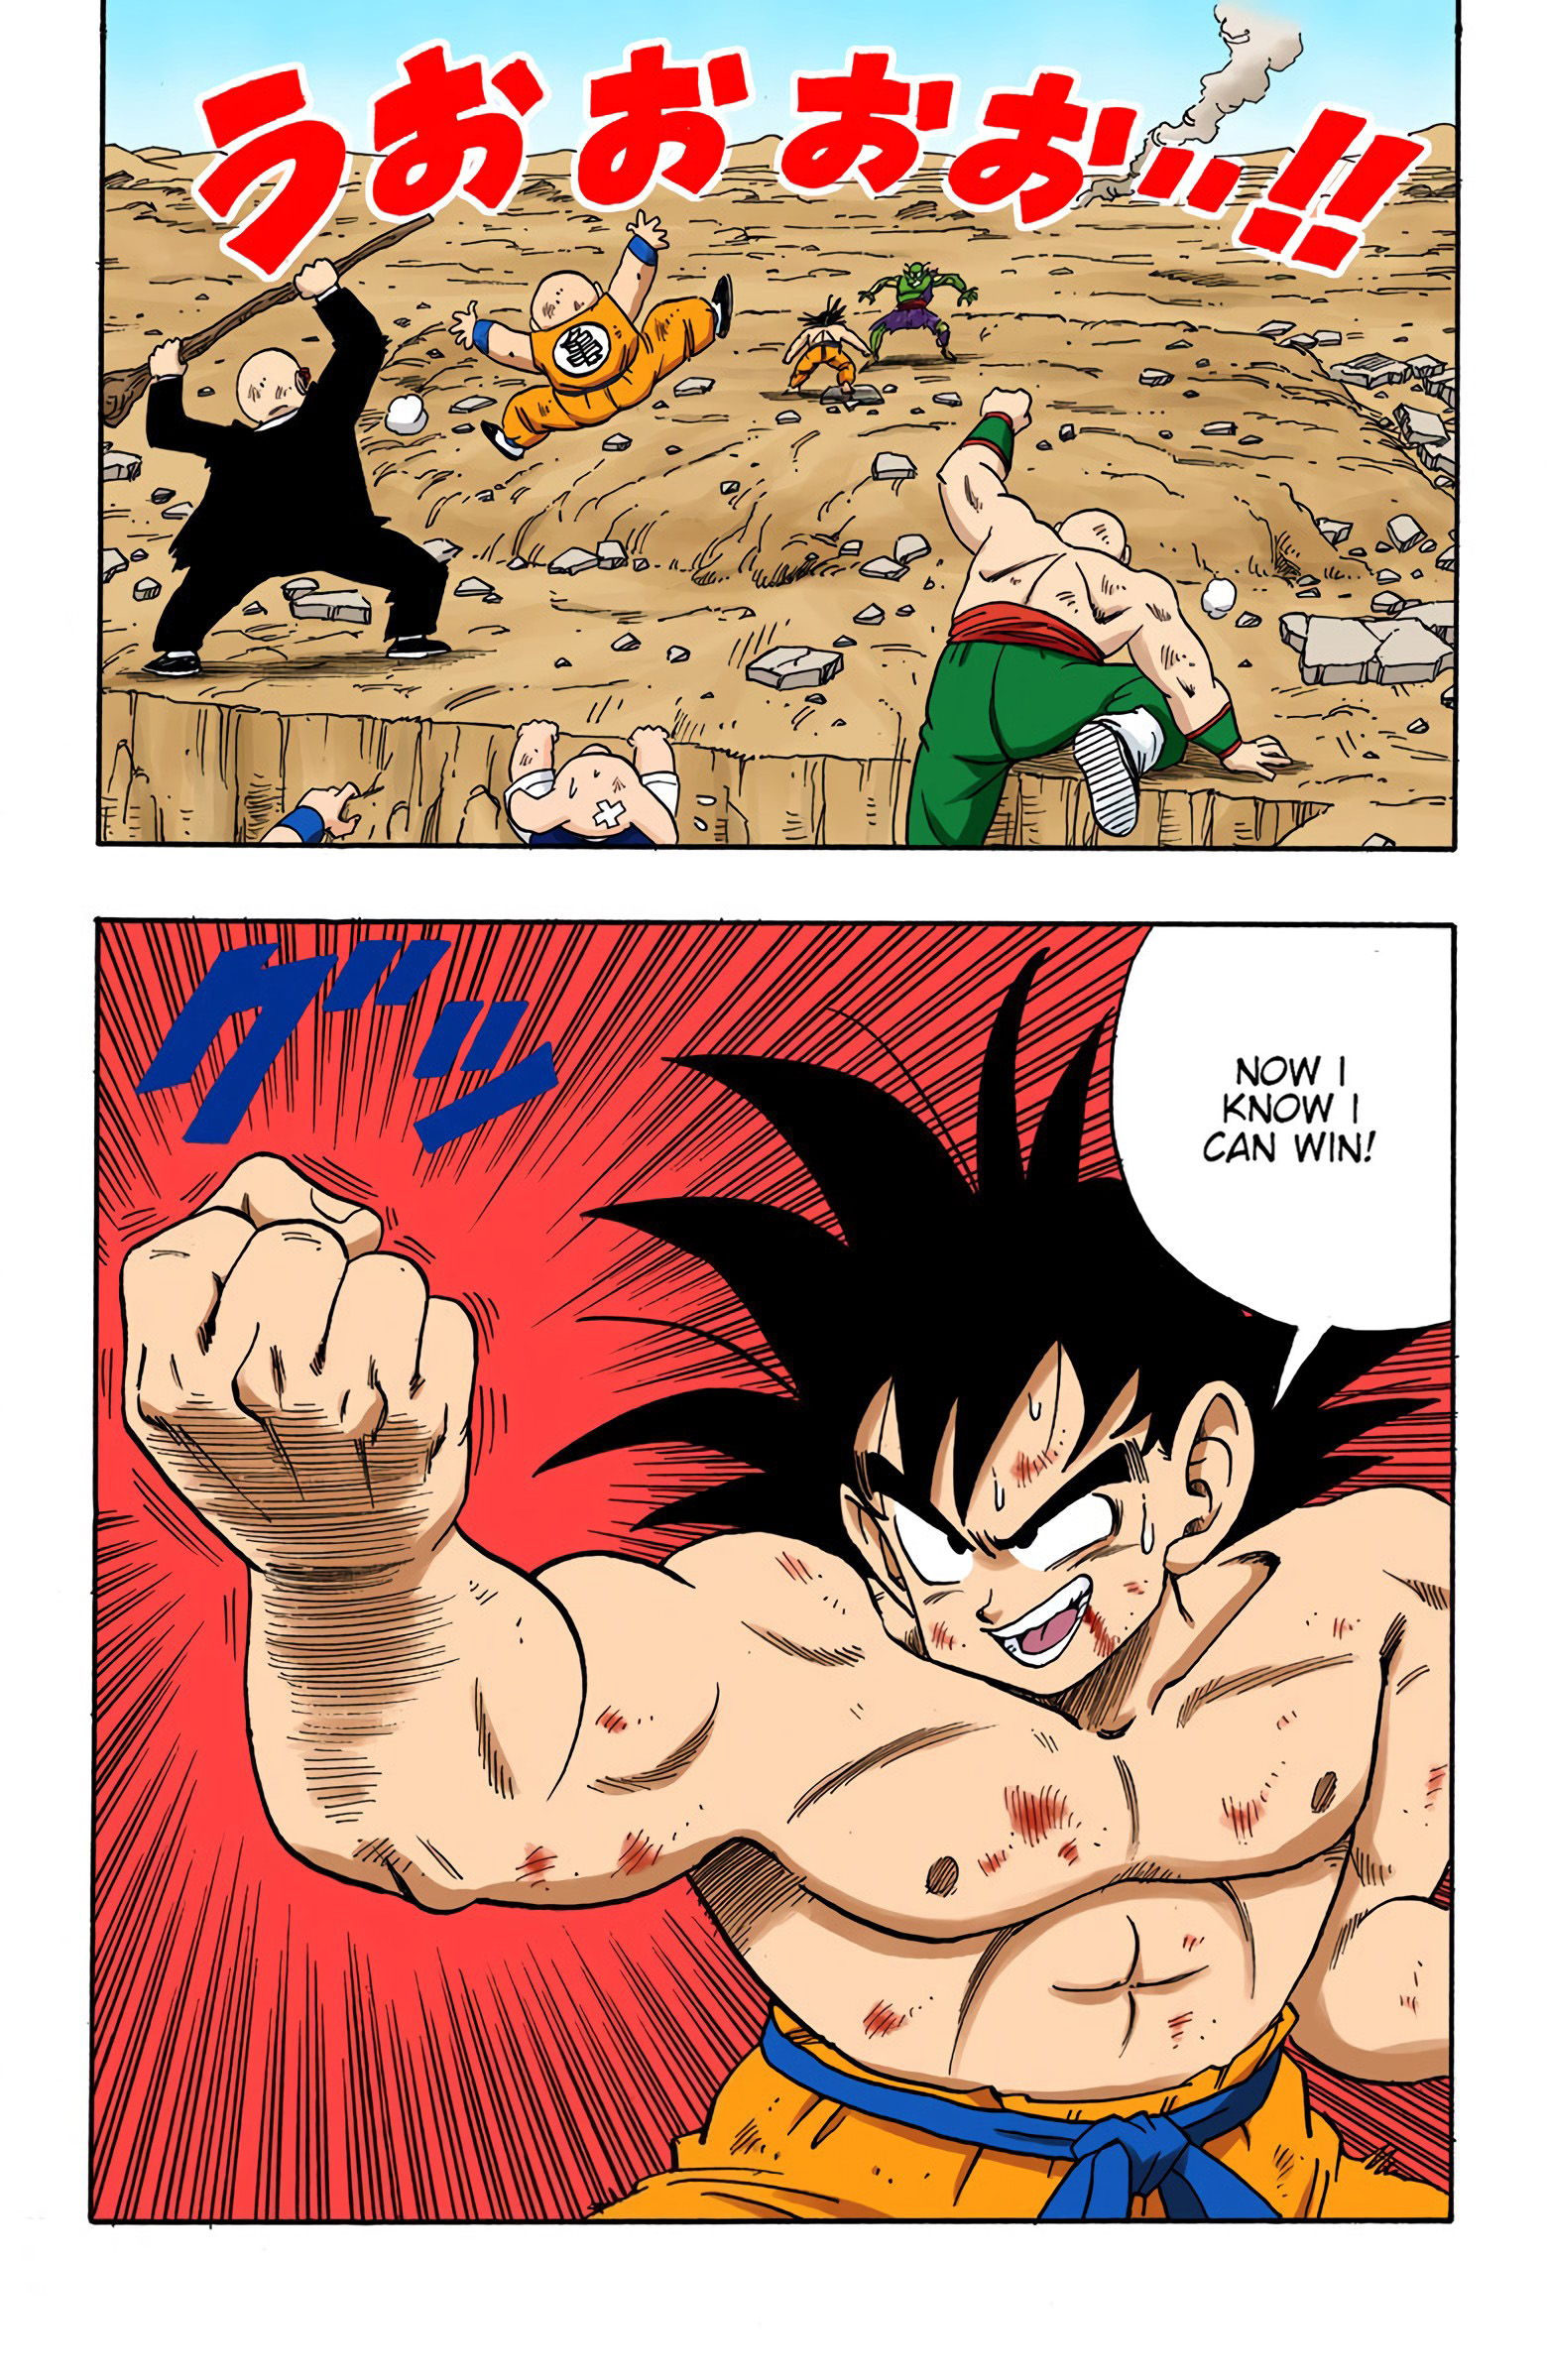 Dragon Ball - Full Color Edition Vol.16 Chapter 190